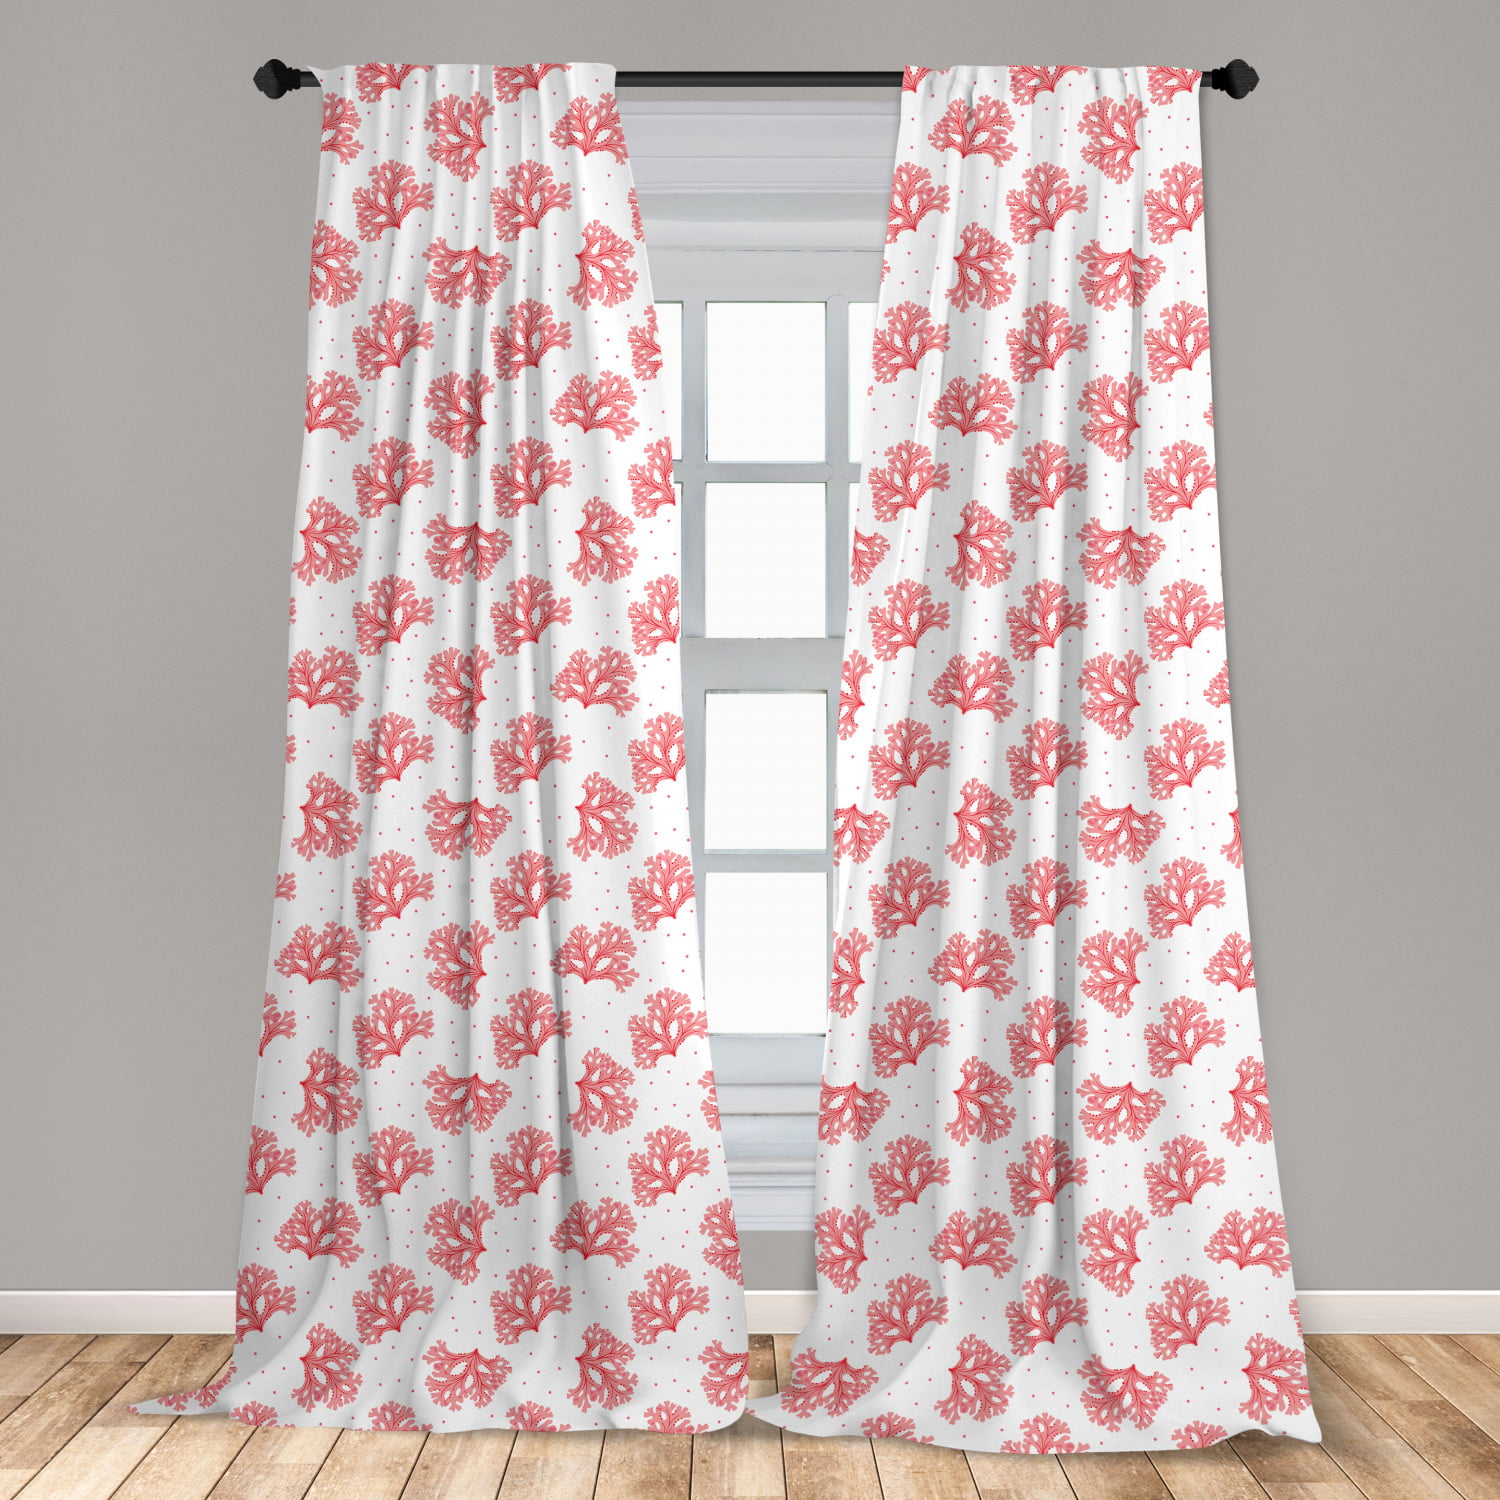 Coral Microfiber Curtains 2 Panel Set Living Room Bedroom in 3 Sizes 